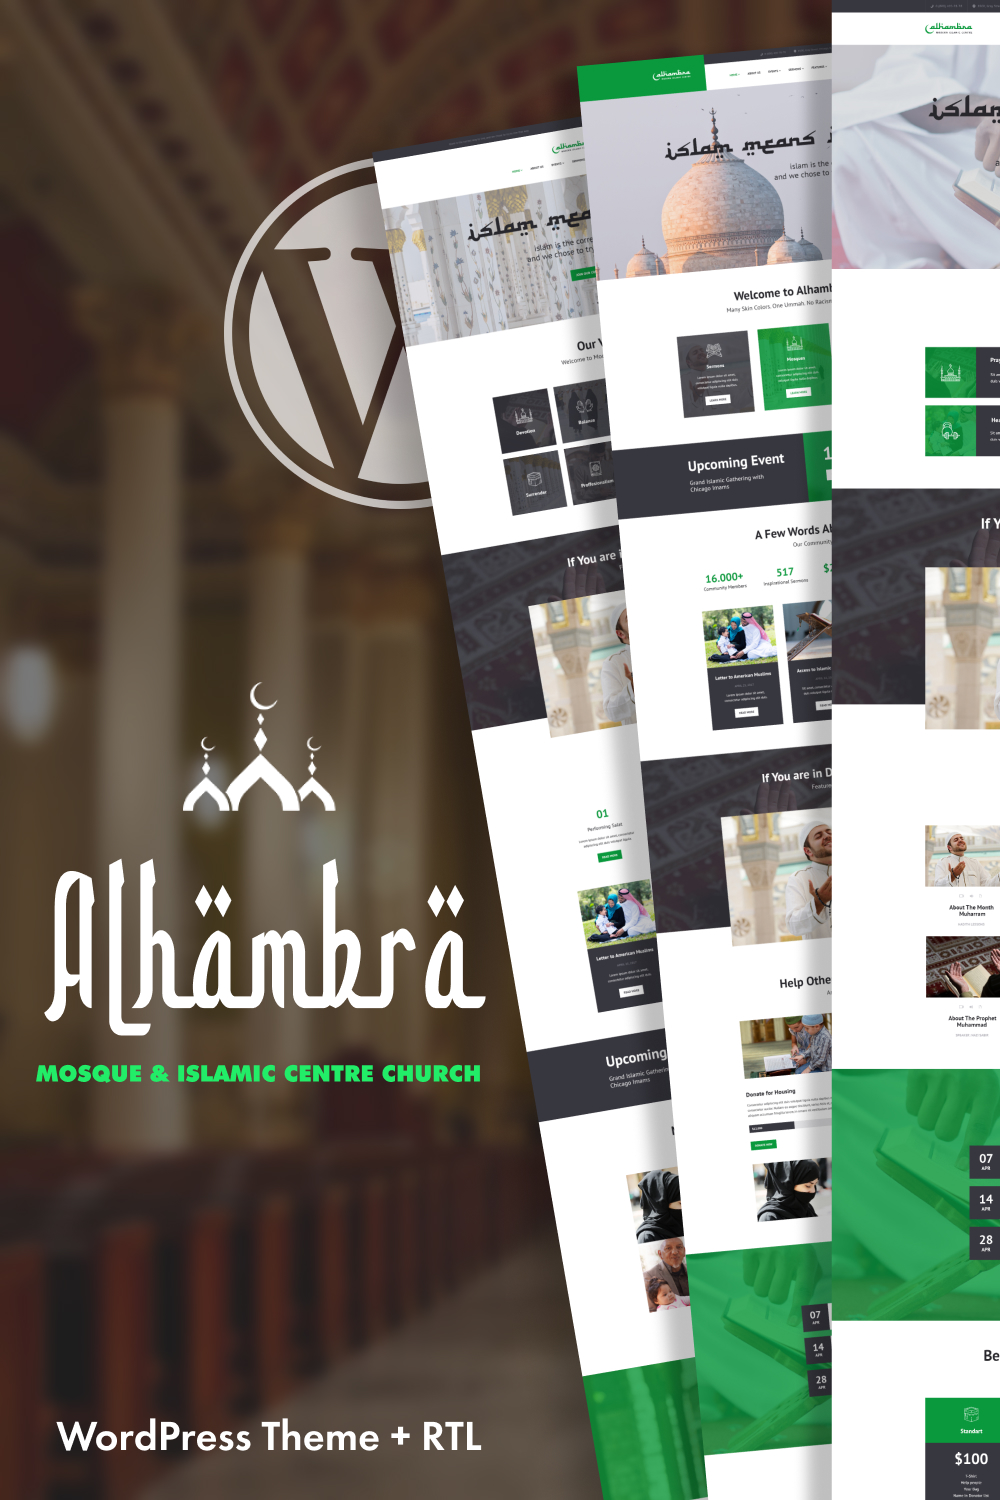 Pinterest images with alhambra mosque islamic centre church wordpress theme.